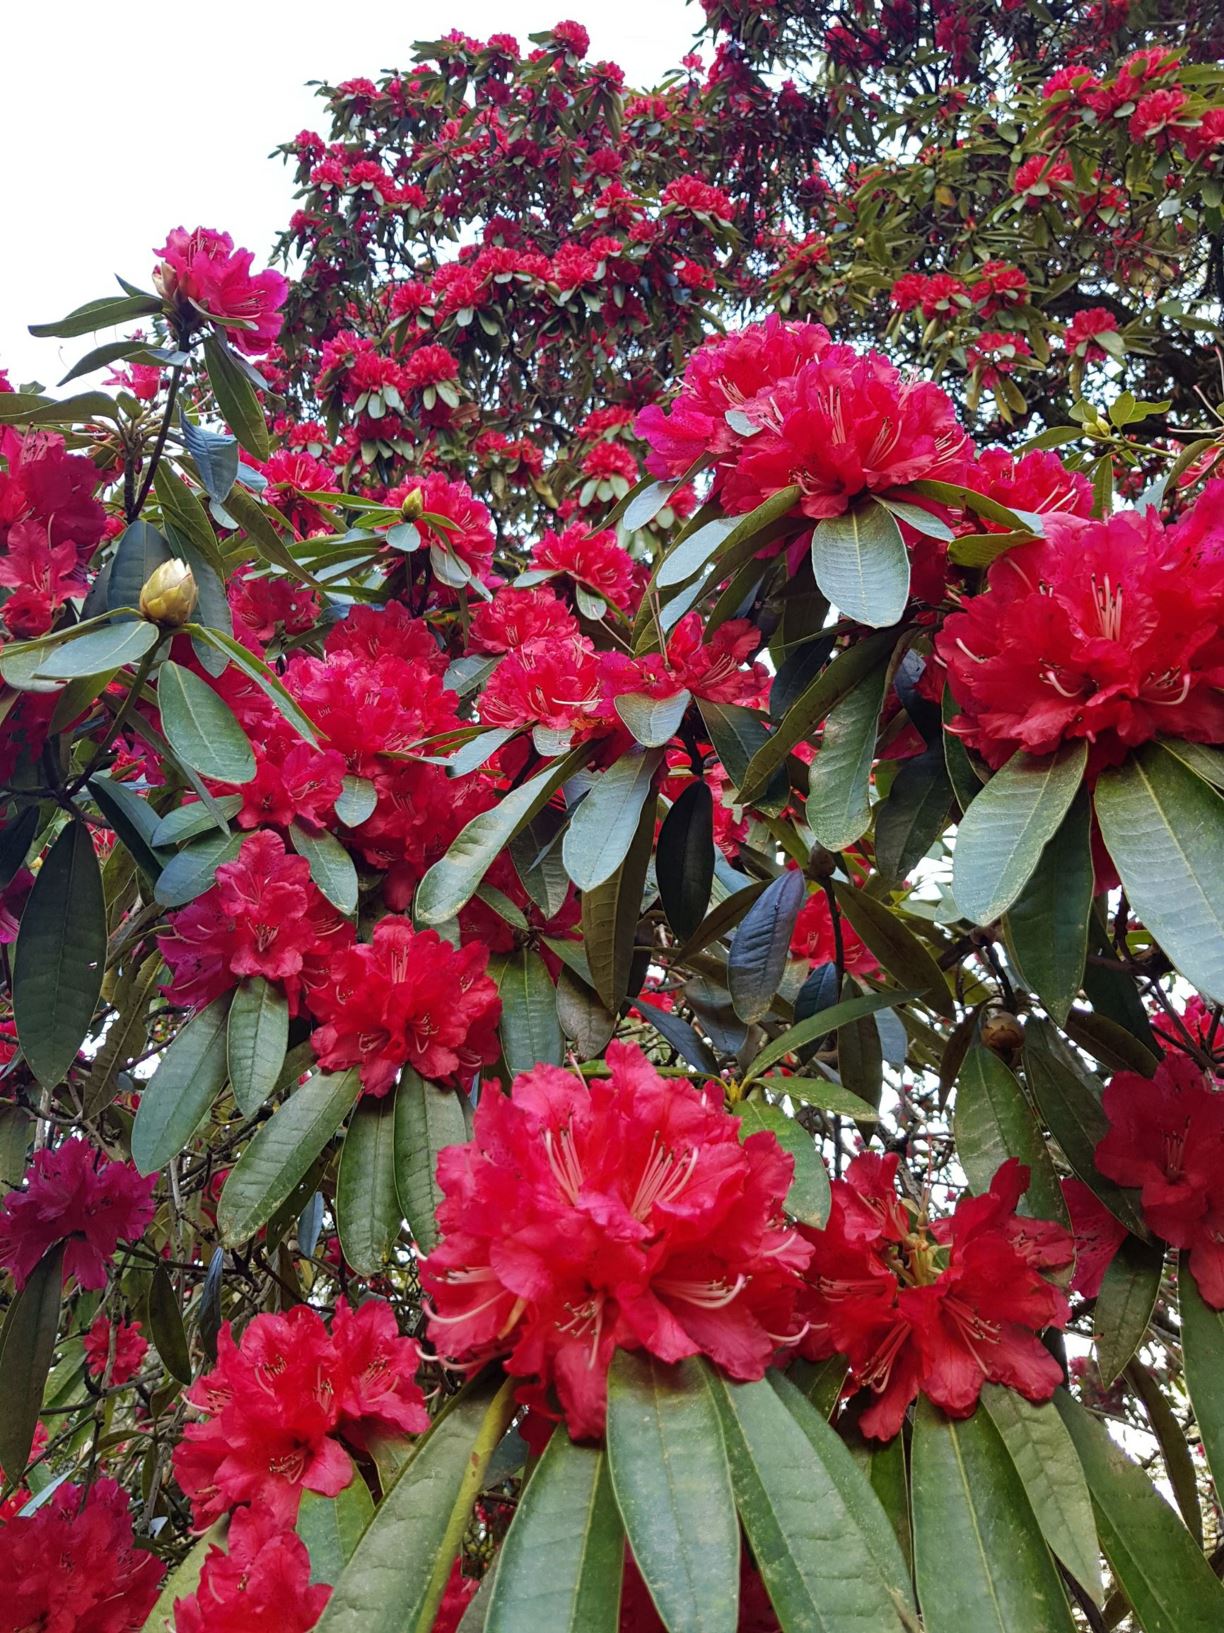 Rhododendron 'Ivery's Scarlet'